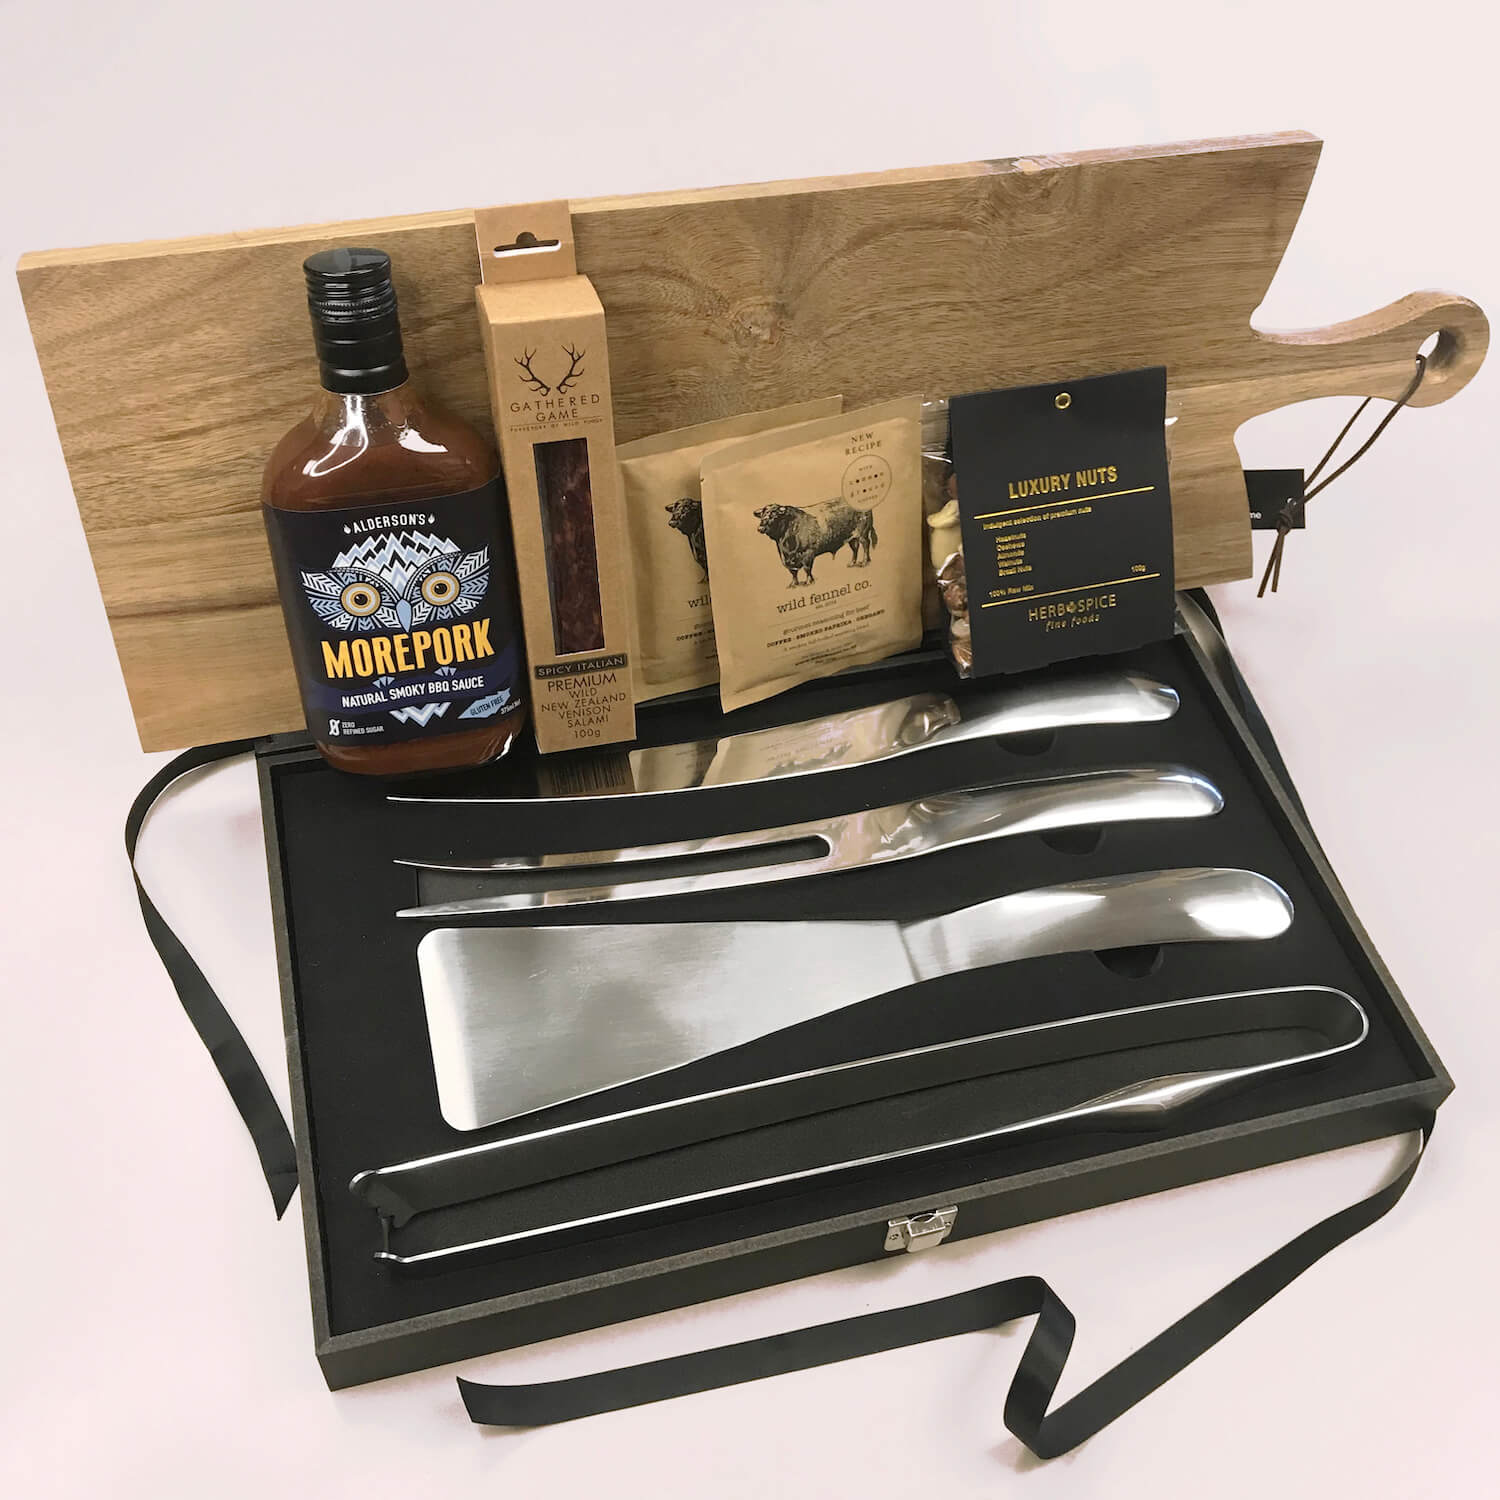 The BBQ Entertainer Gift Box